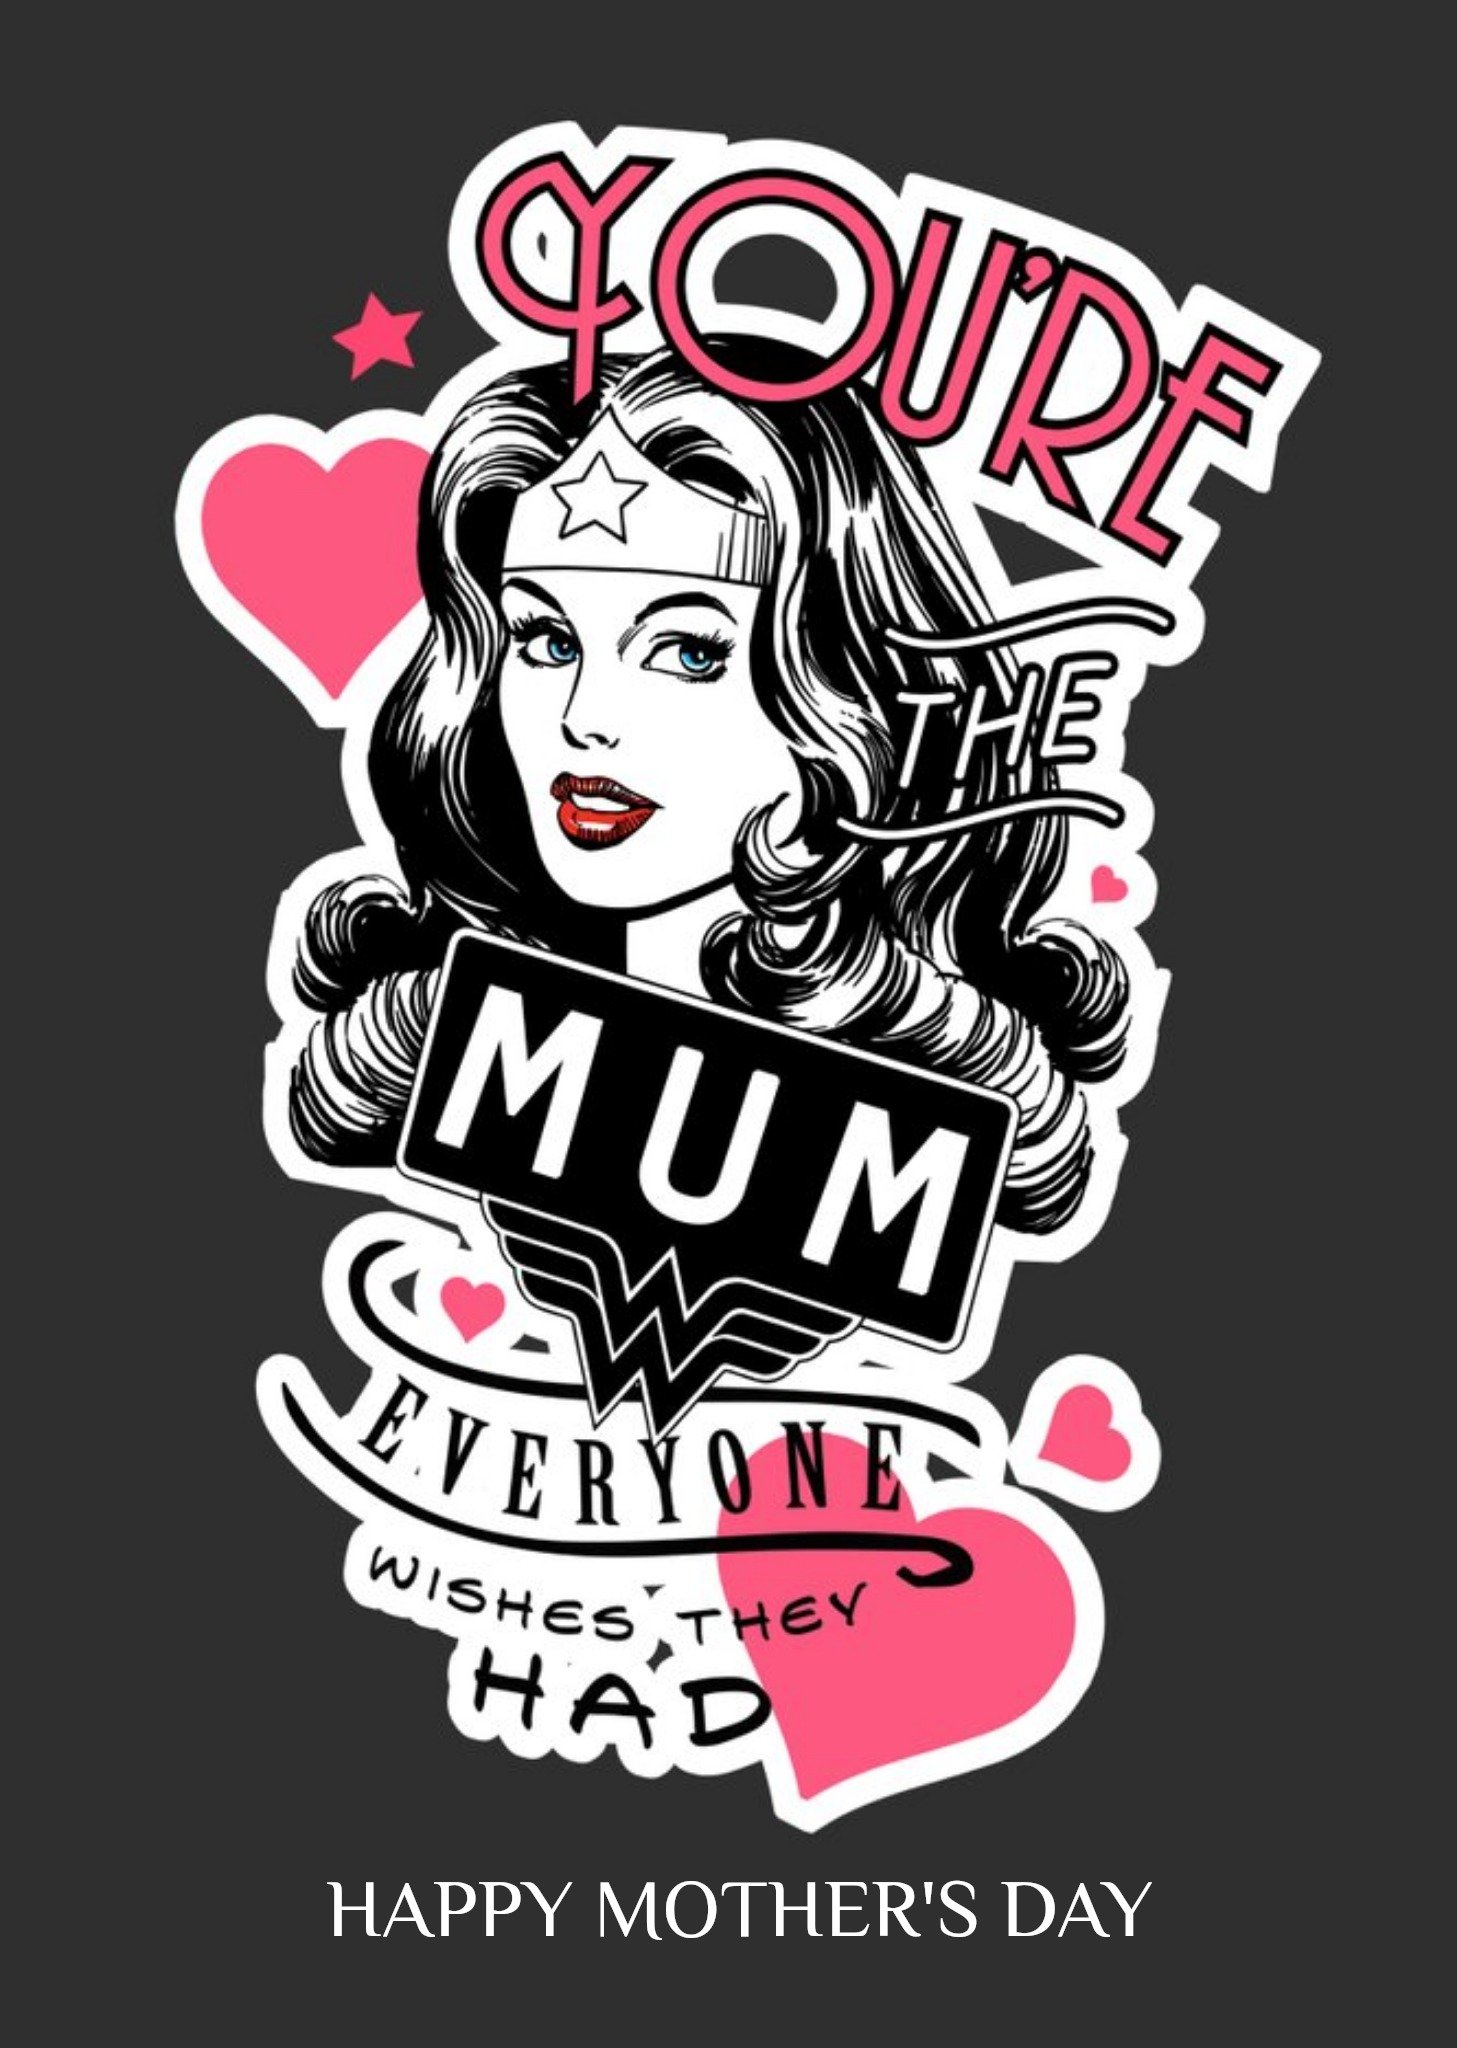 Marvel Wonder Woman You're The Mum Everyone Wishes They Had Card, Large